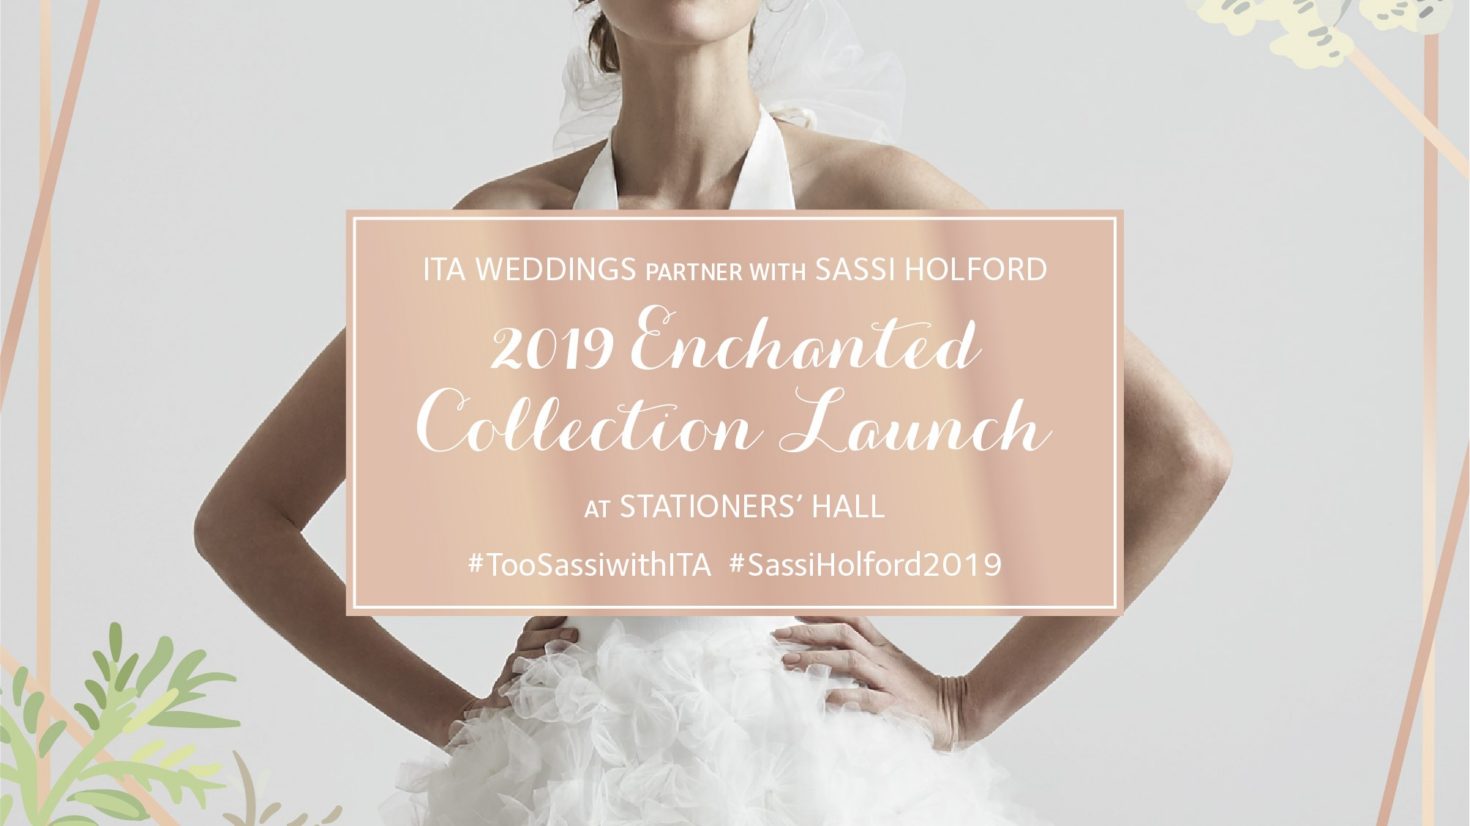 Sassi Holford set to unveil 2019 couture wedding collection with ITA weddings